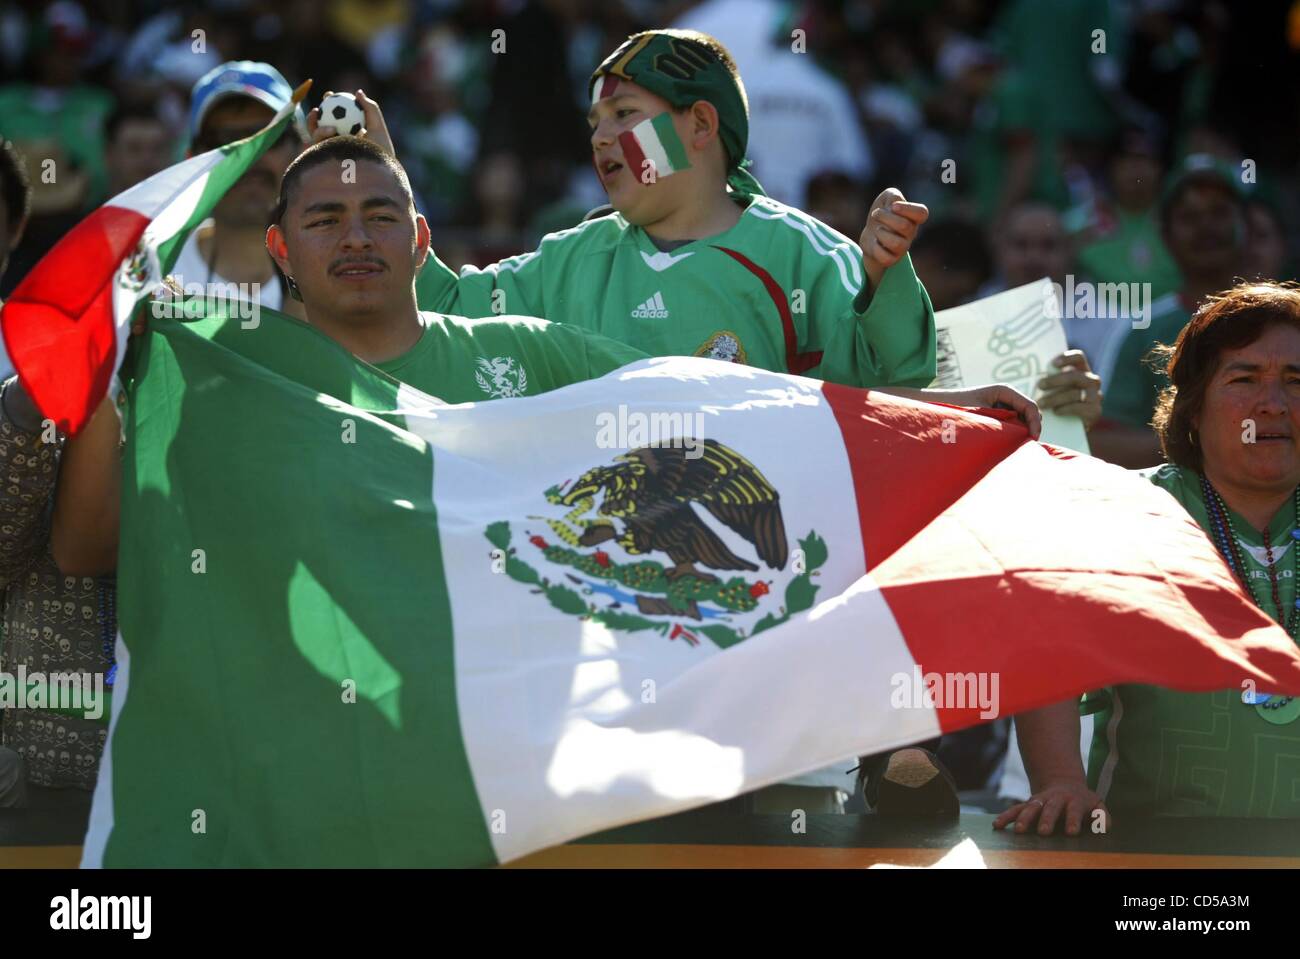 Mexican fans are have fun during the friendly game between the pre-Olympic national teams of Mexico and Australia at McAfee Coliseum in Oakland, Calif., on Sunday, Mar. 2, 2008. Mexico and Australia tied 1-1.  (Ray Chavez/The Oakland Tribune) Stock Photo